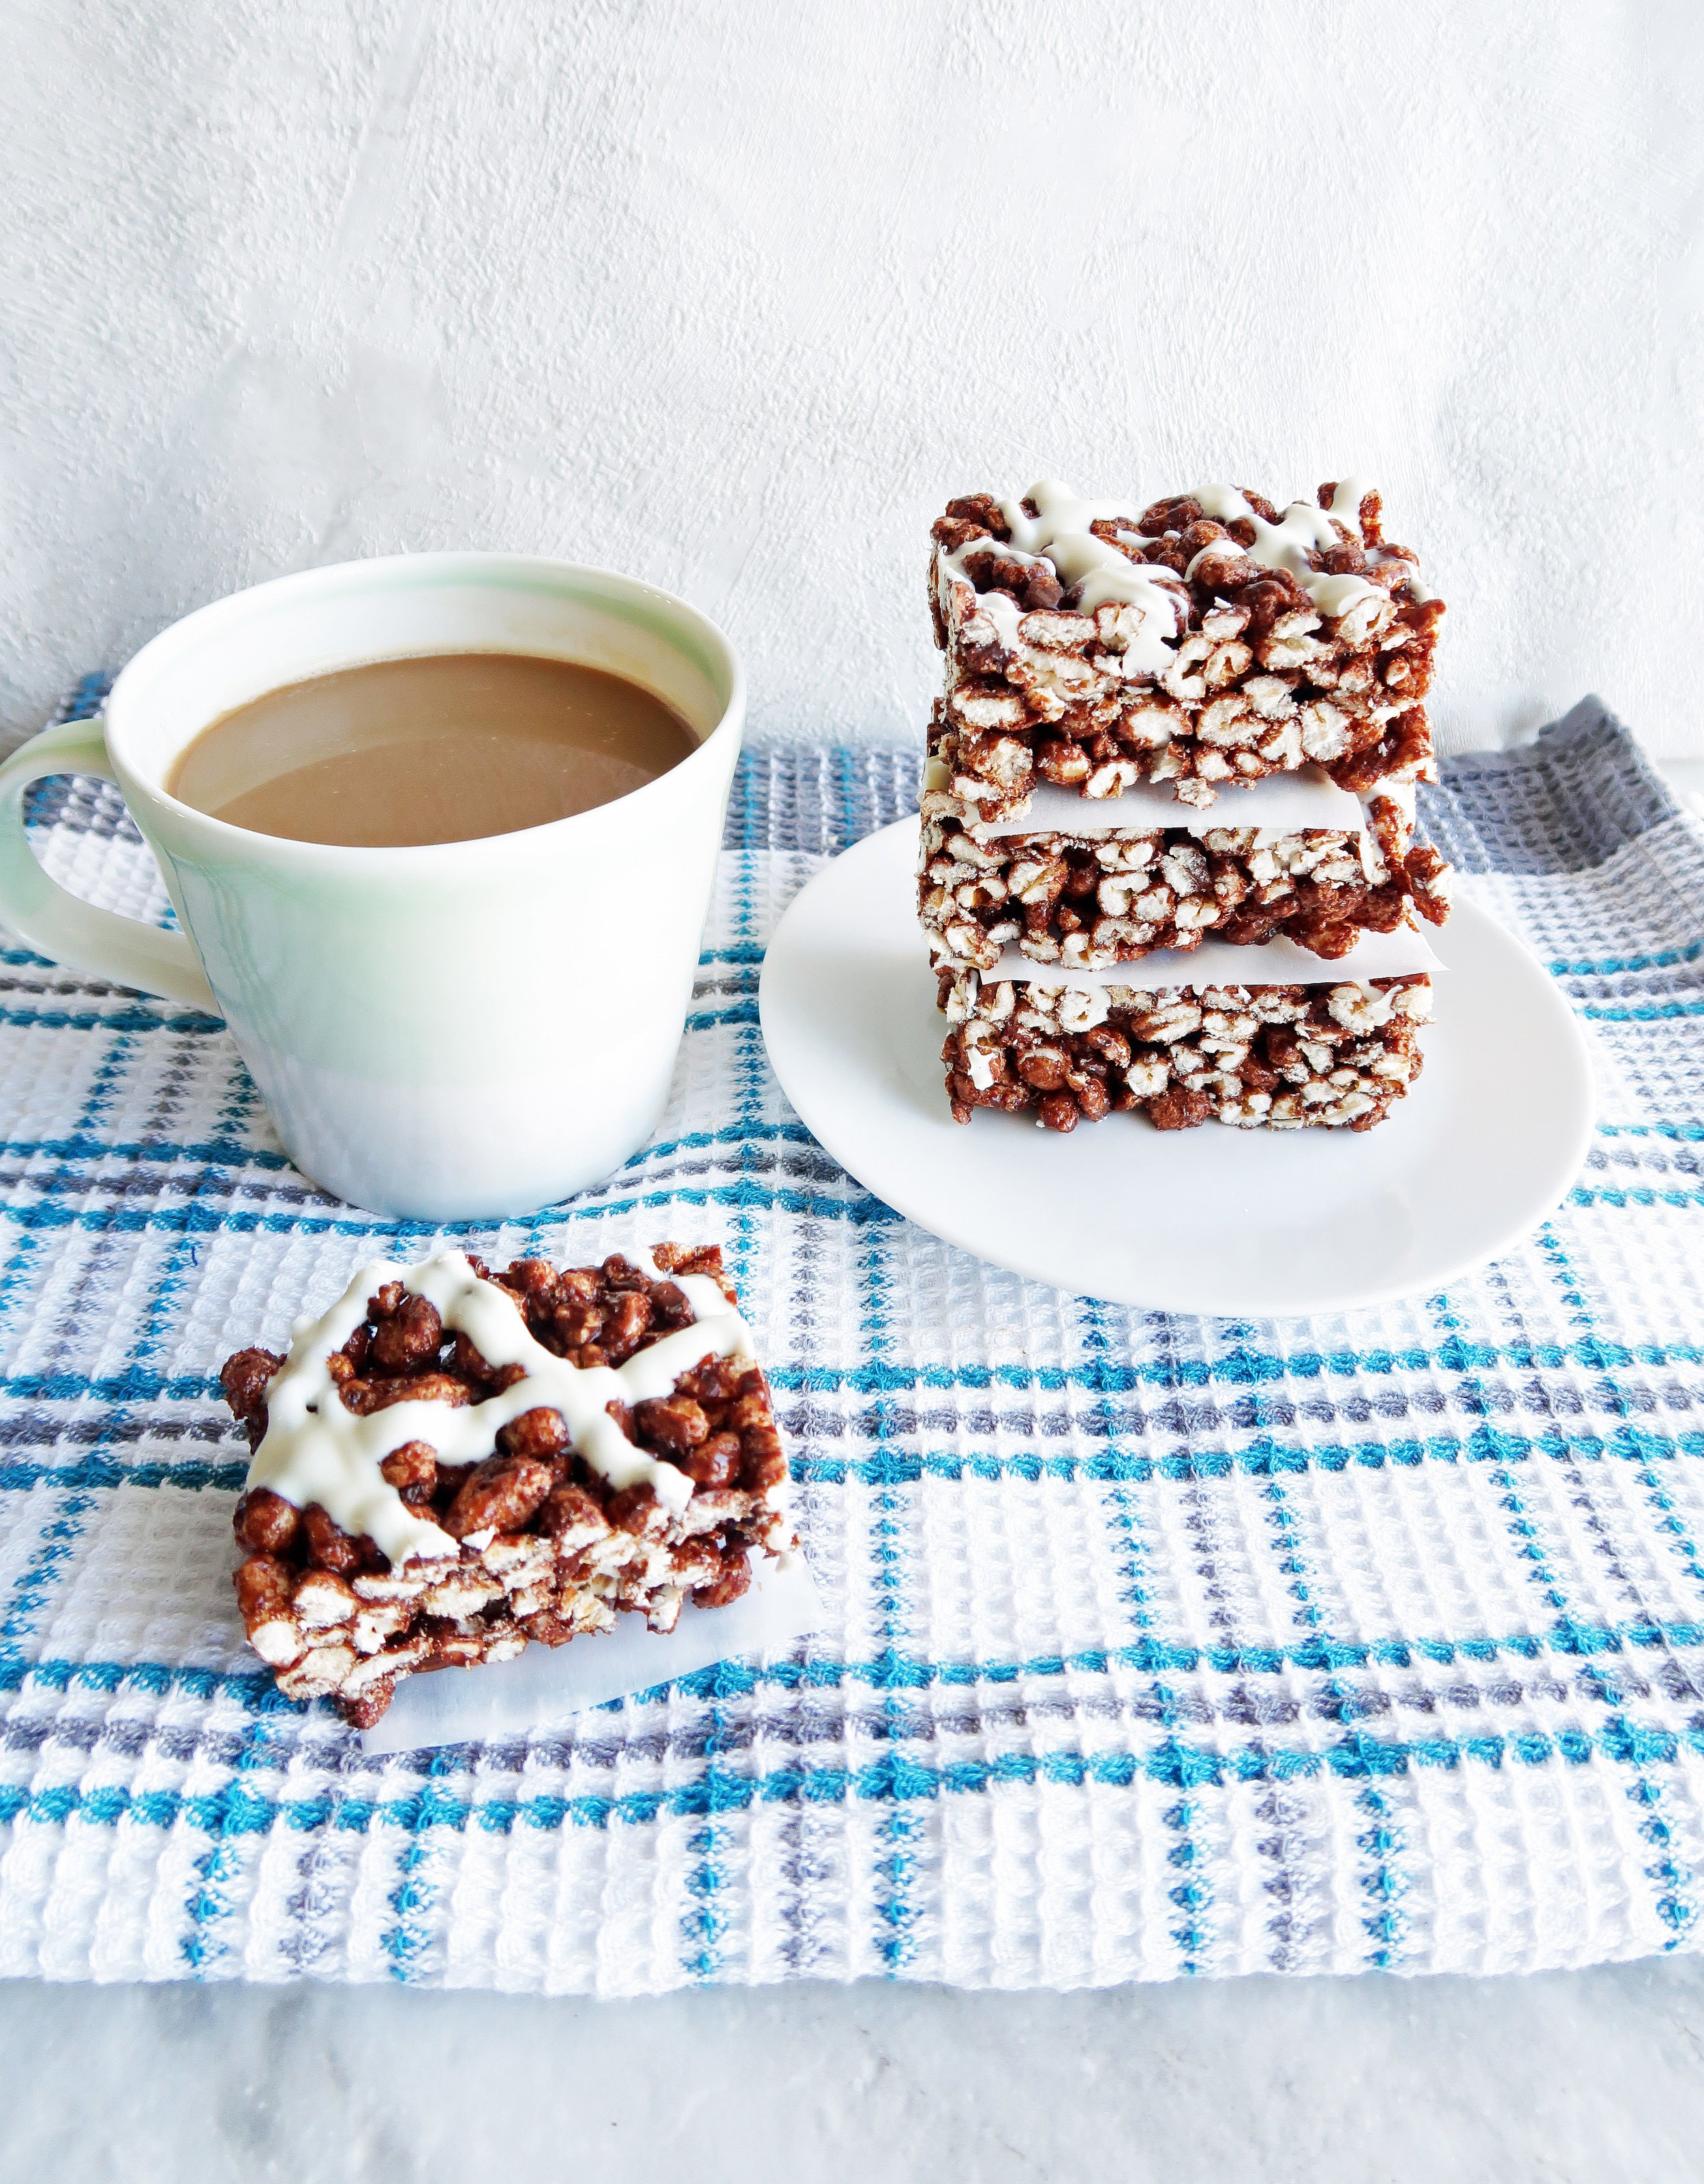 Three Chocolate Marshmallow Puffed Wheat Squares stacked on a white plate along with another puffed wheat square and cup of coffee beside the plate.